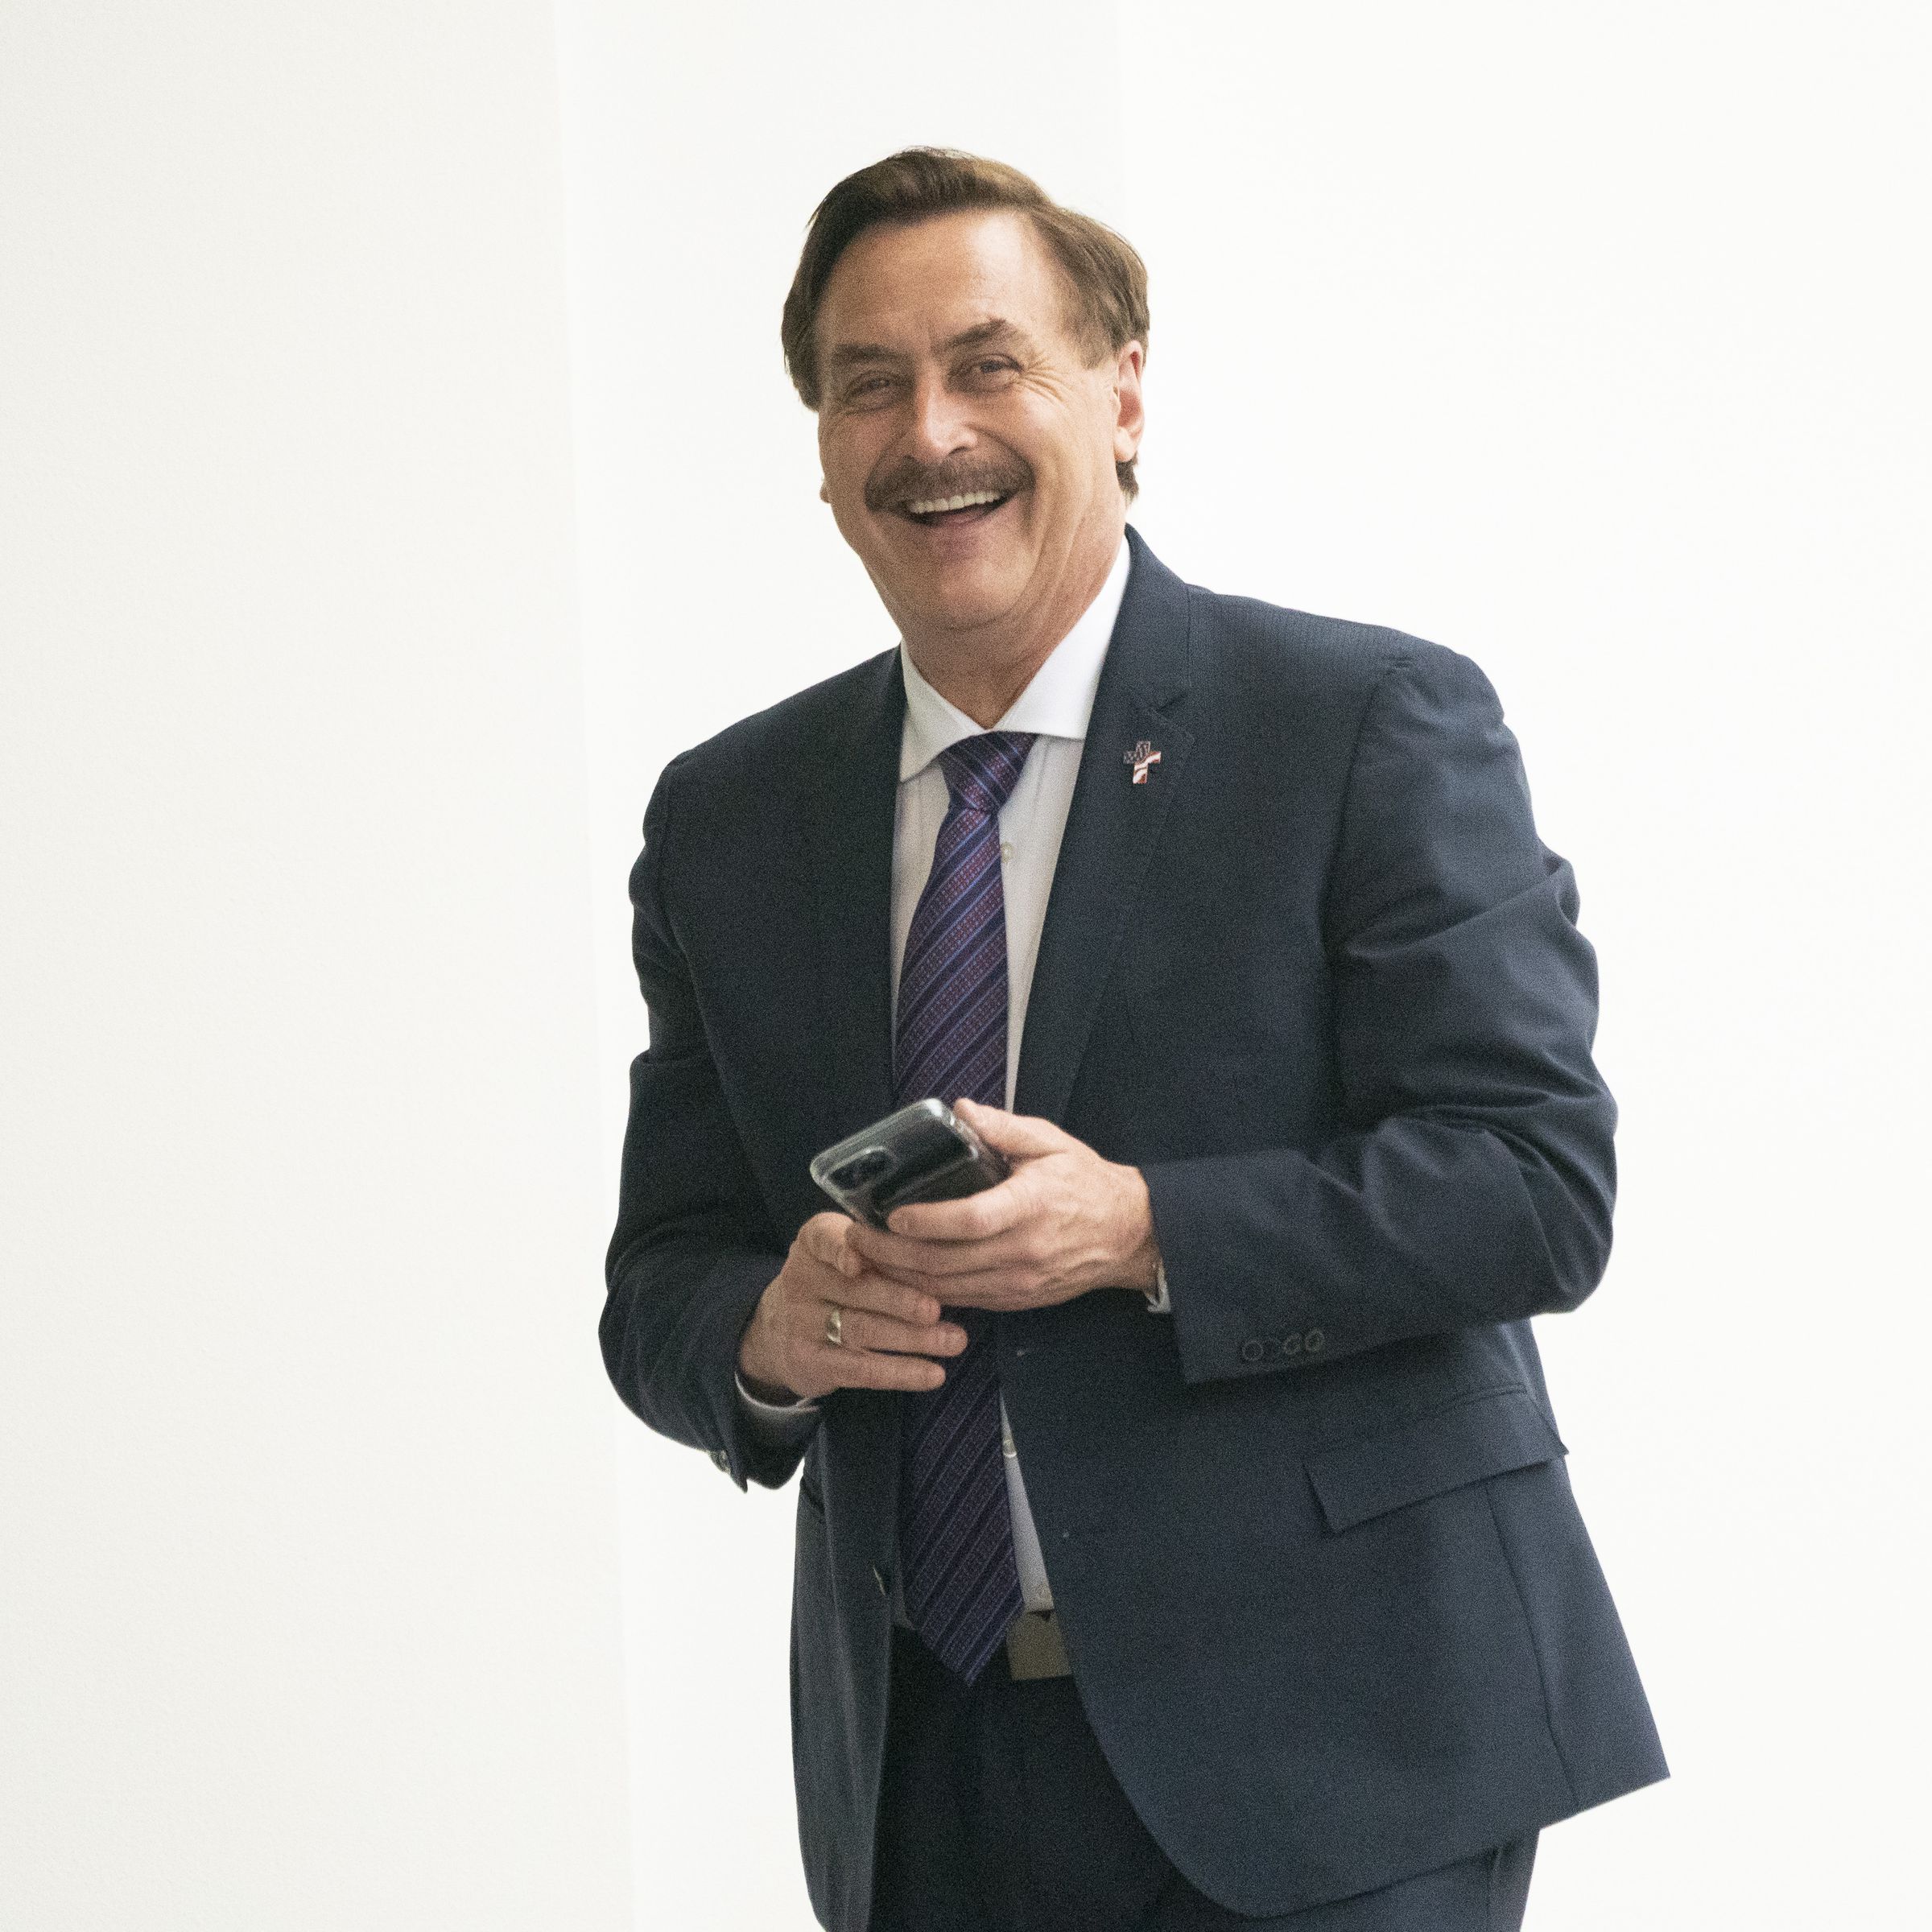 MyPillow and FrankSpeech founder Mike Lindell, seen outside the White House during the final weeks of the Trump administration.